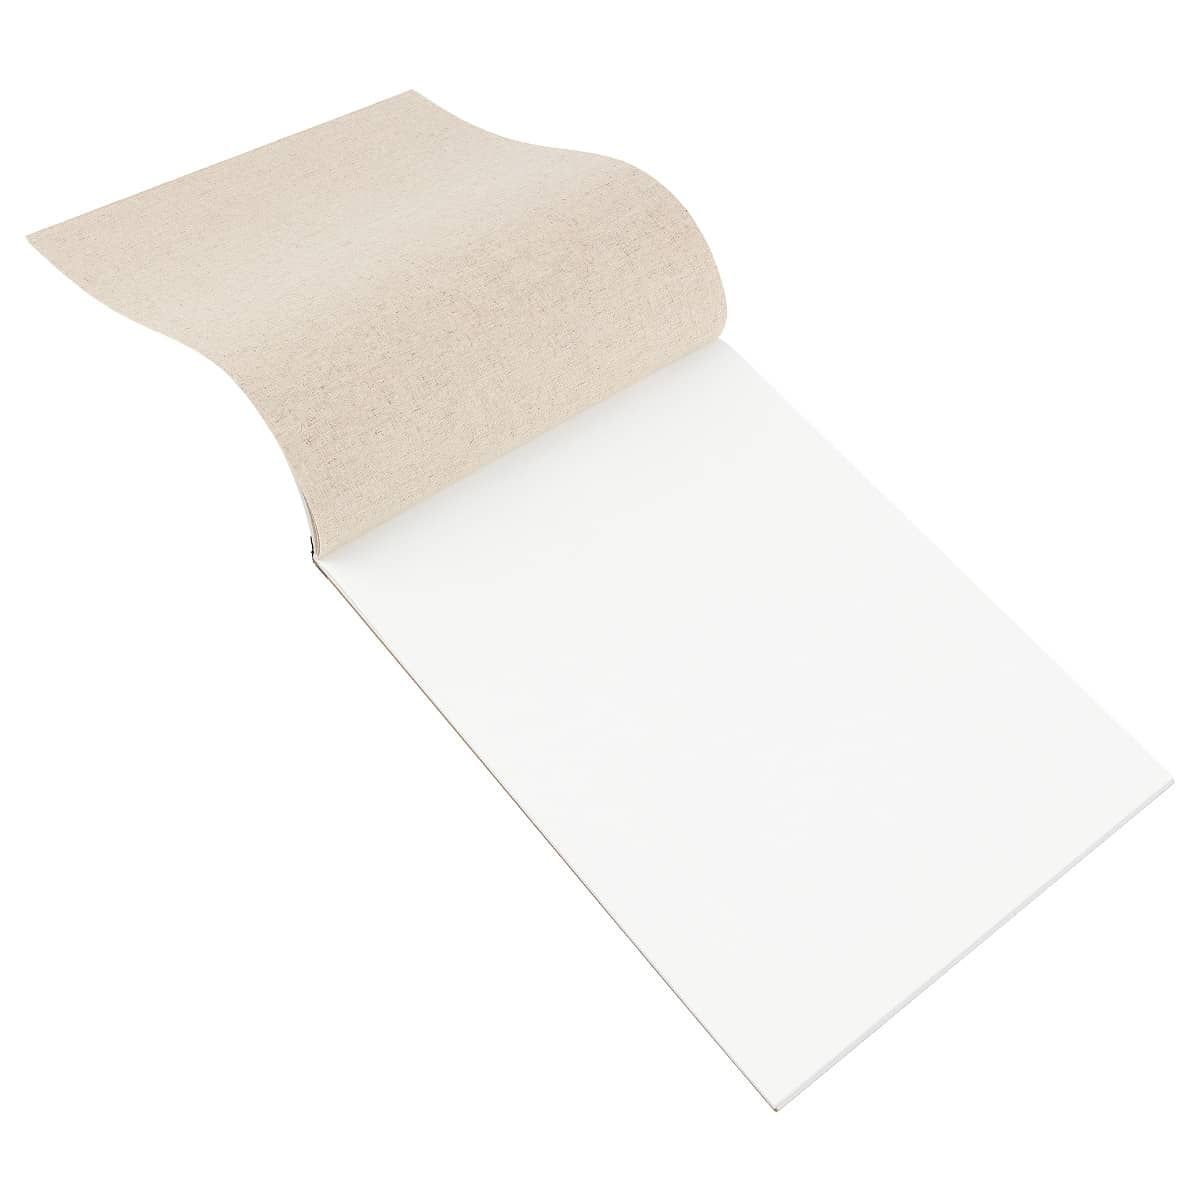 Linen sheets are tape mounted onto stiff backing board for durability